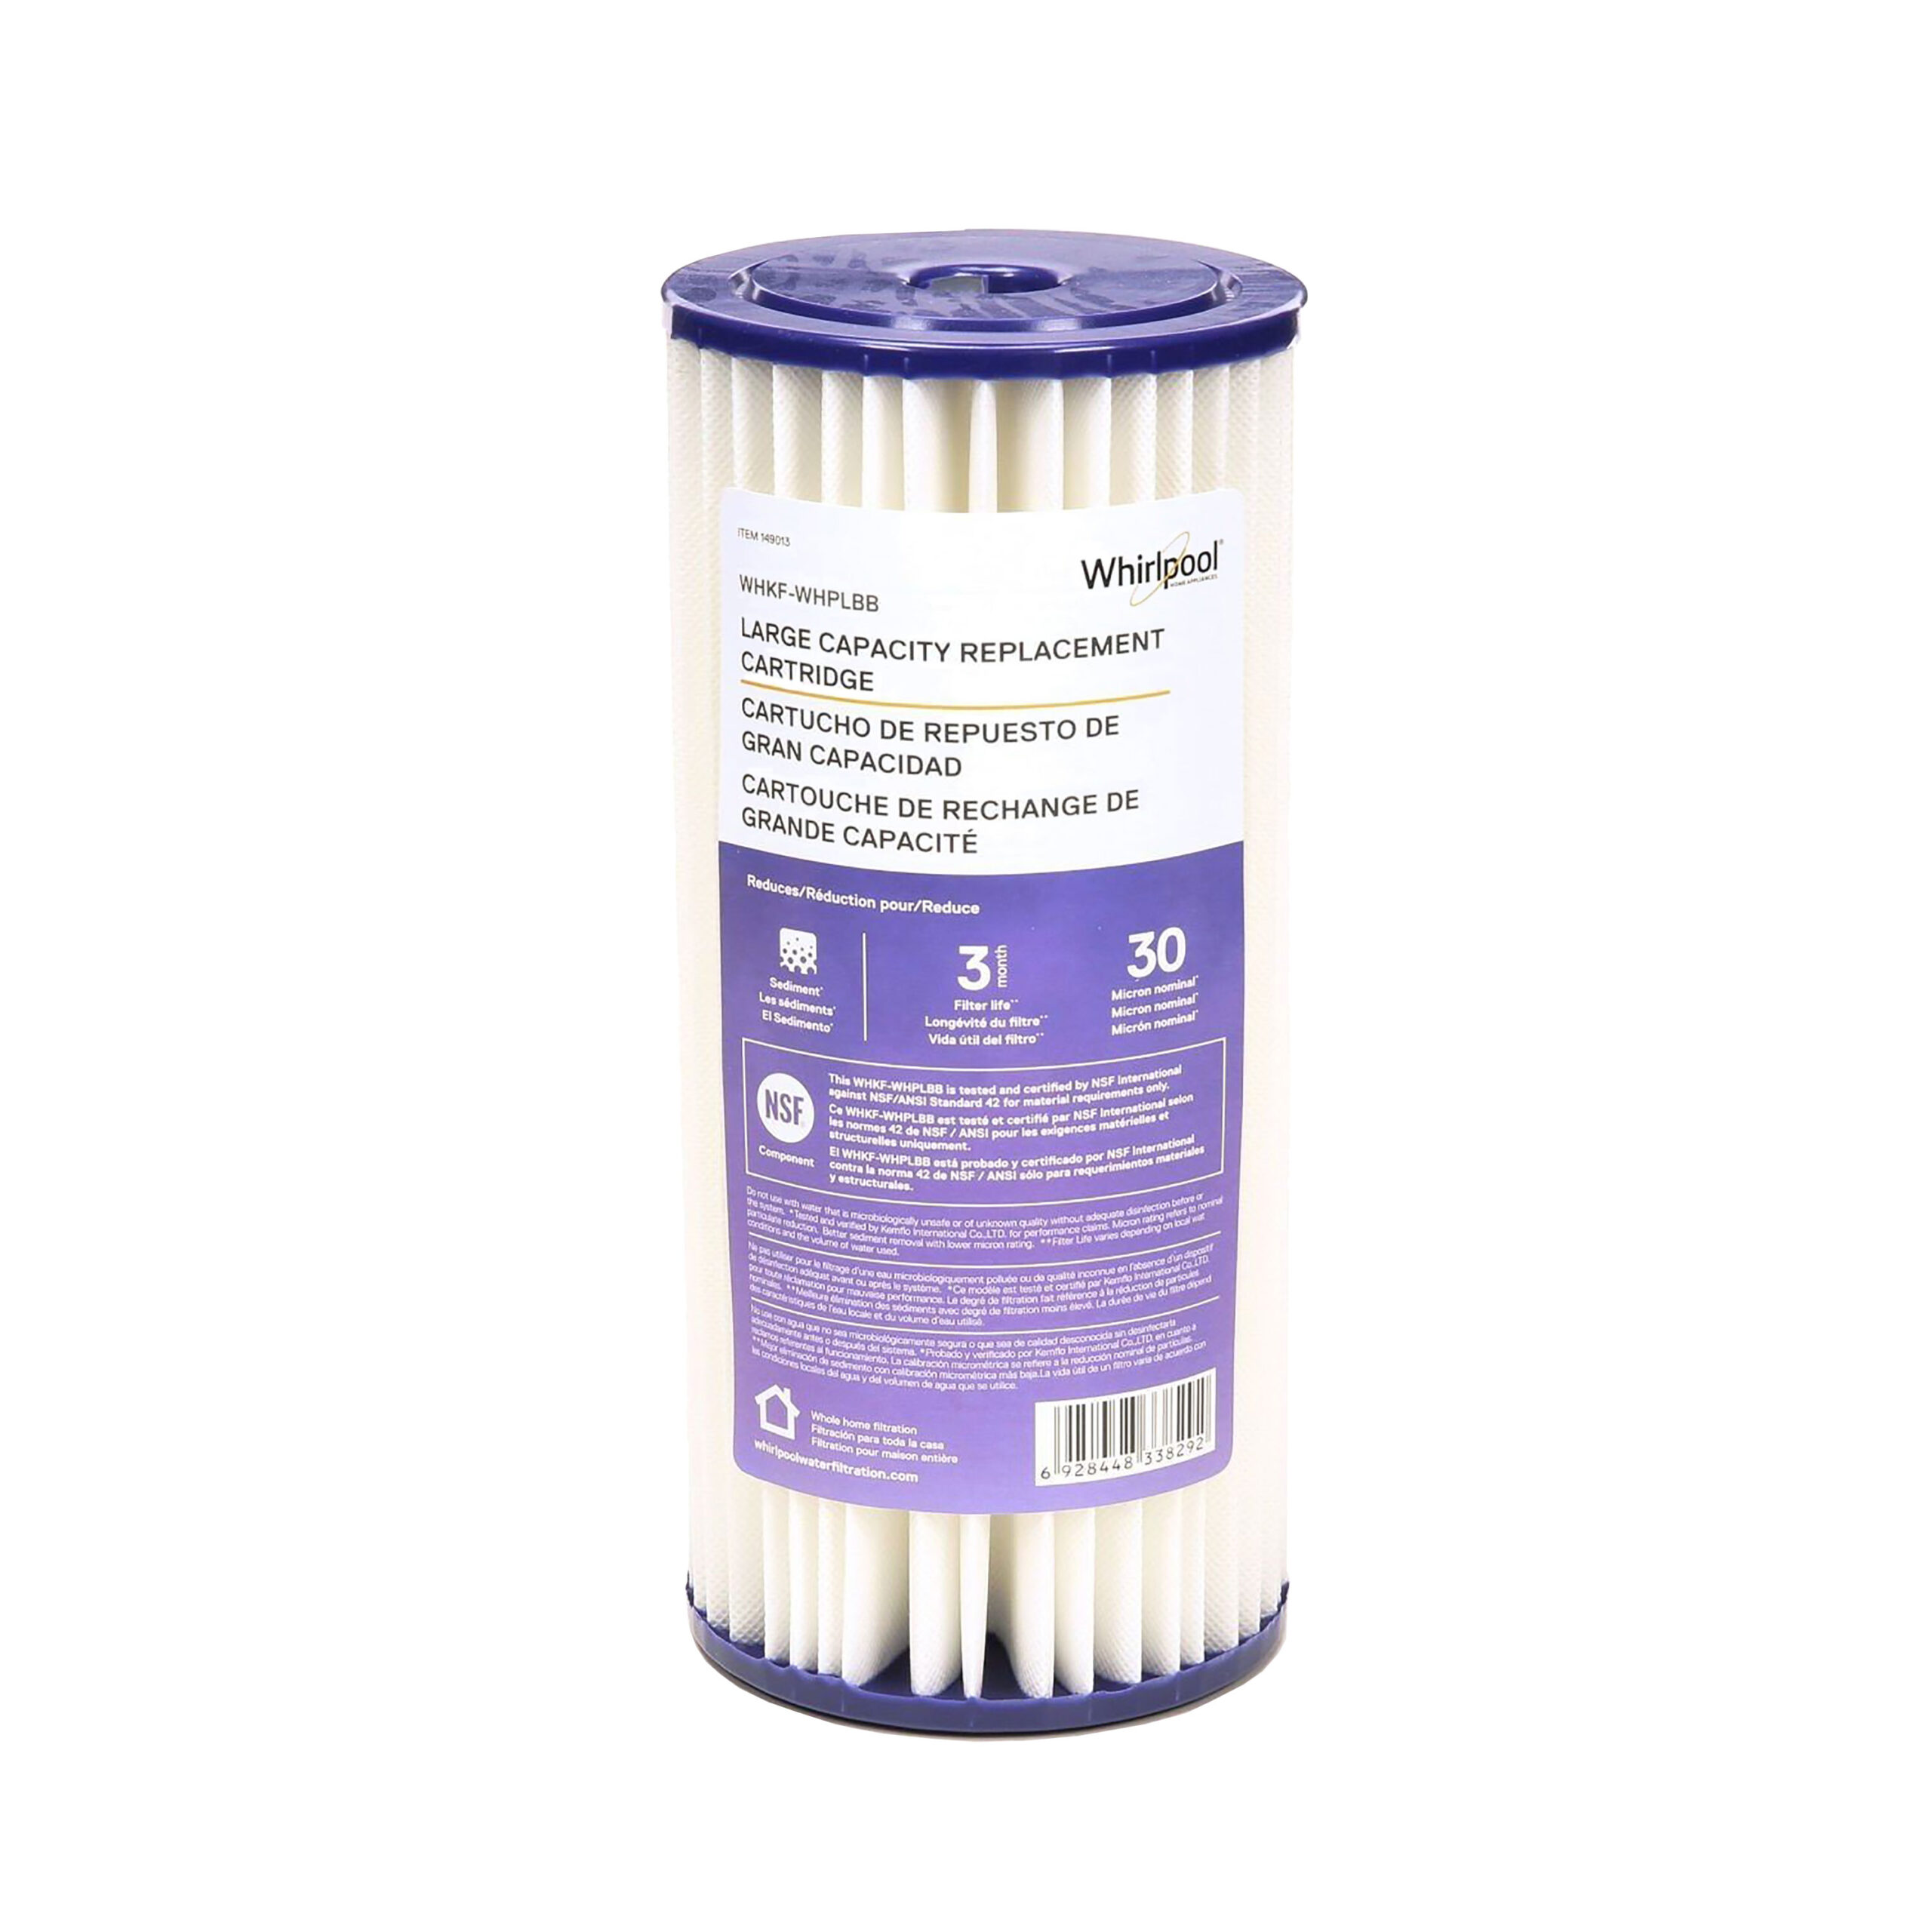 Home Whole Filter Whirlpool pk Whirlpool® -1 - Large WHKF-WHPLBB Pleated Water Capacity Filtration